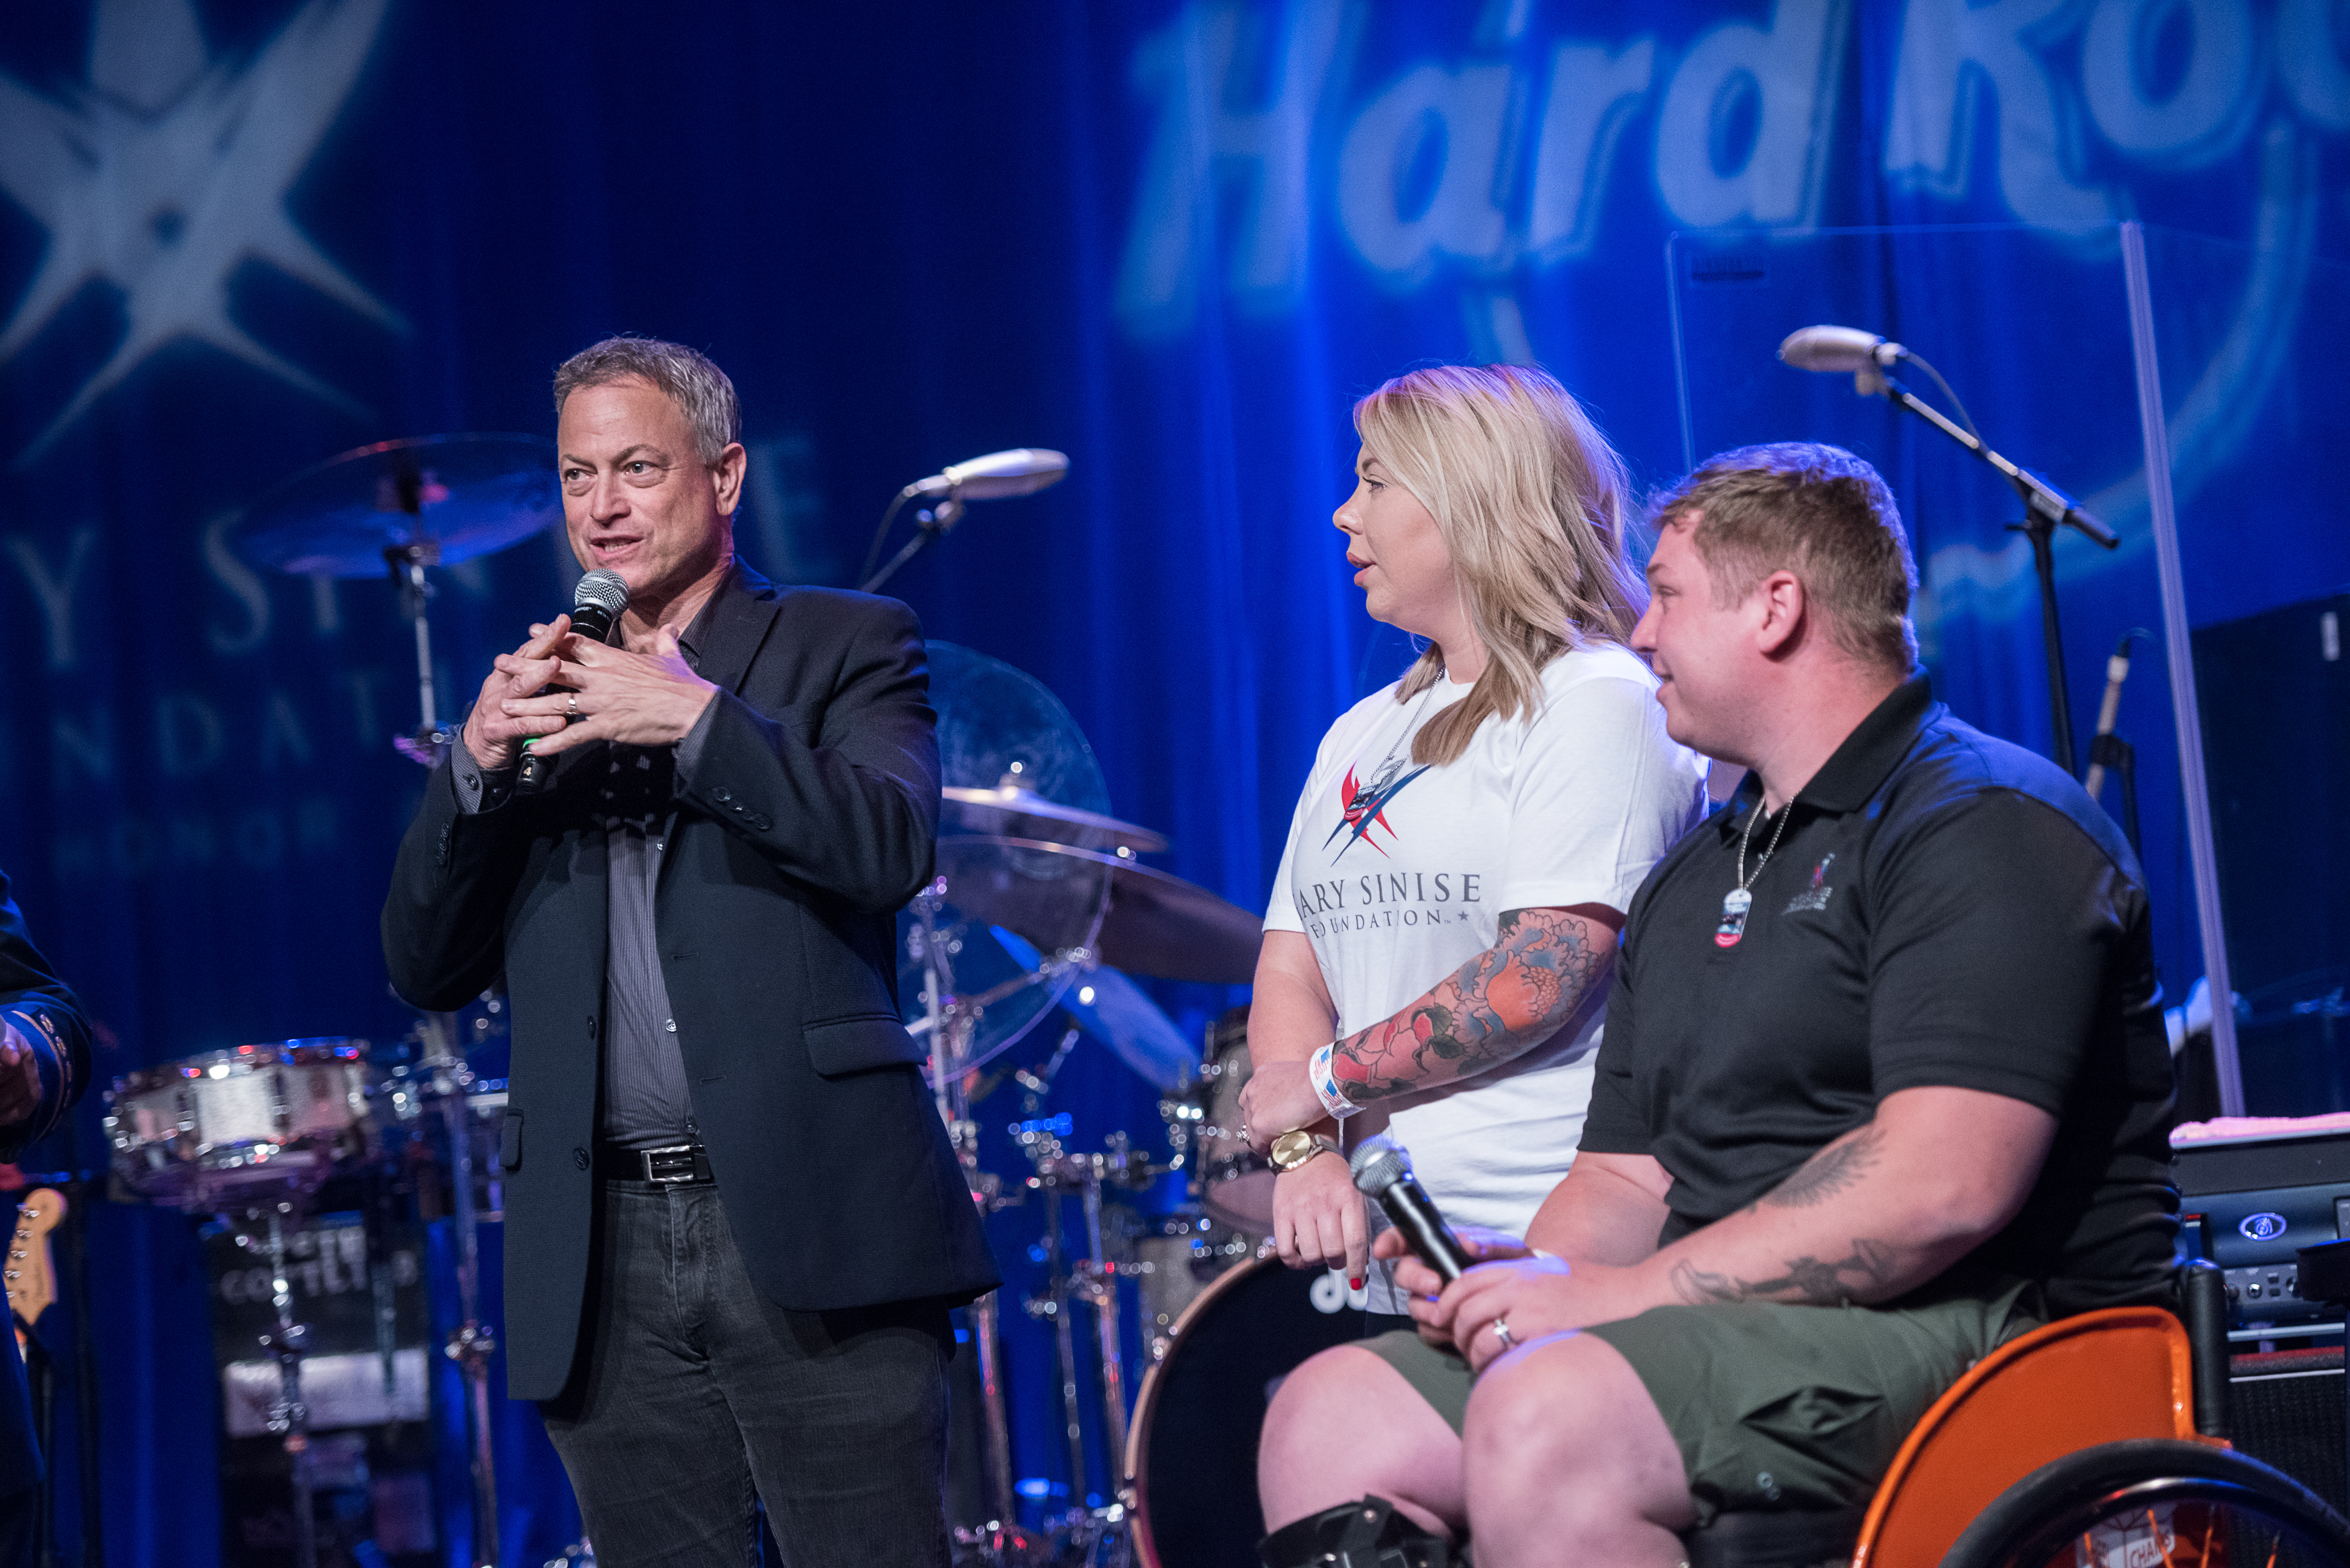 Gary Sinise attends the Rock The Boat Fleet Week Kickoff Concert at Hard Rock Cafe, Times Square on May 21, 2015, in New York City | Source: Getty Images